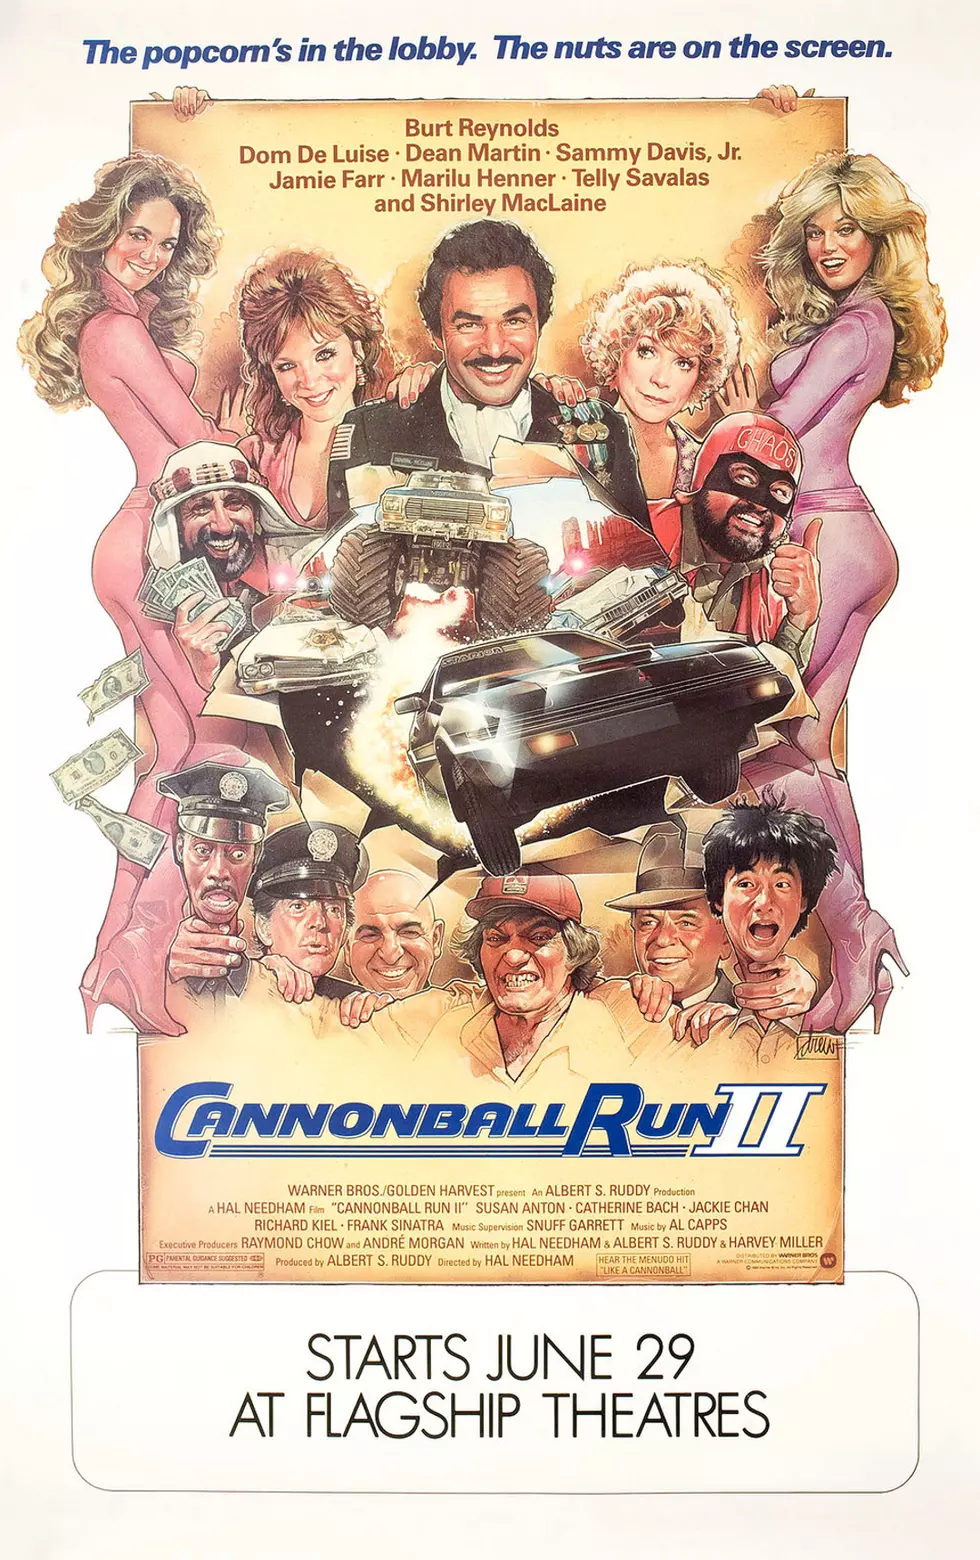 Cannonball Run Is Real, And A Maine Man Did It In A Rental Car.